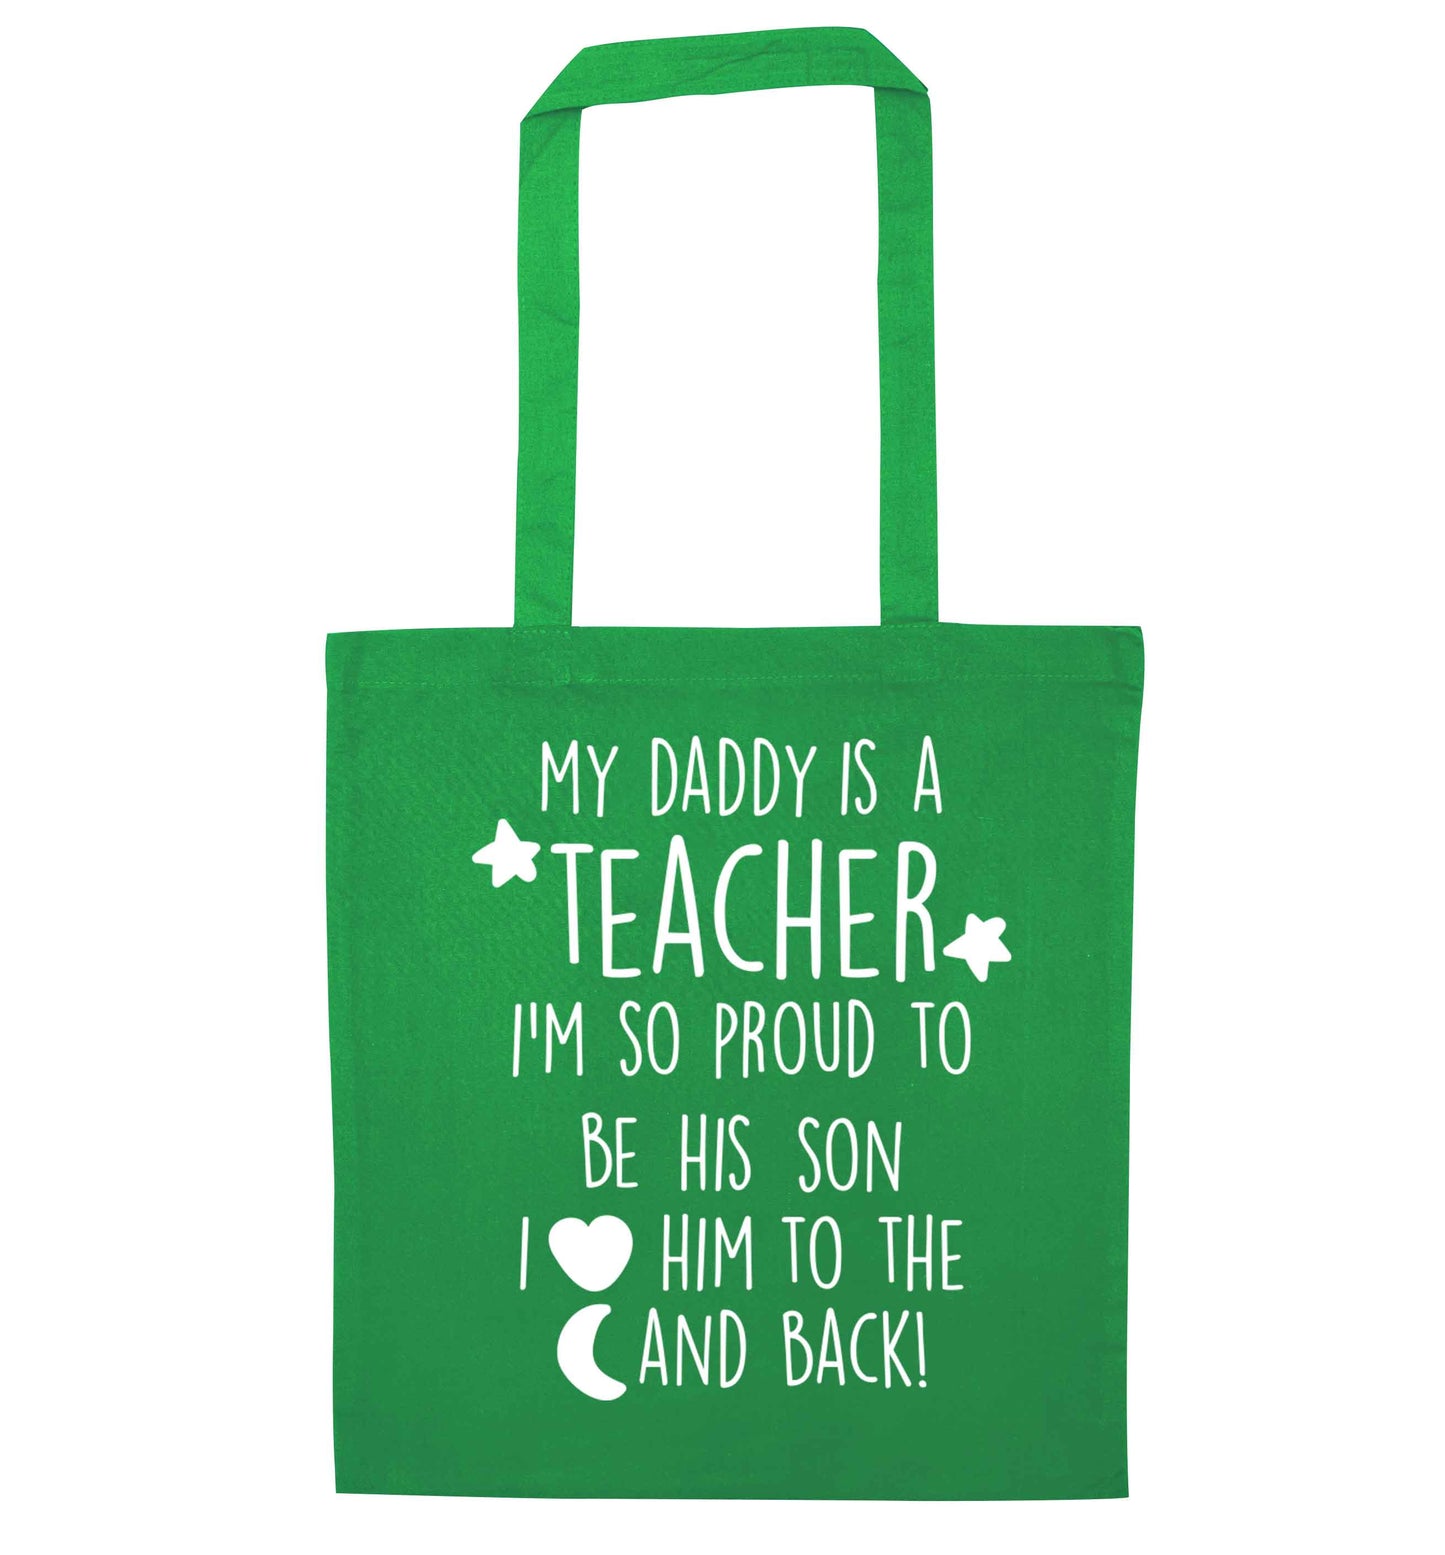 My daddy is a teacher I'm so proud to be his son I love her to the moon and back green tote bag